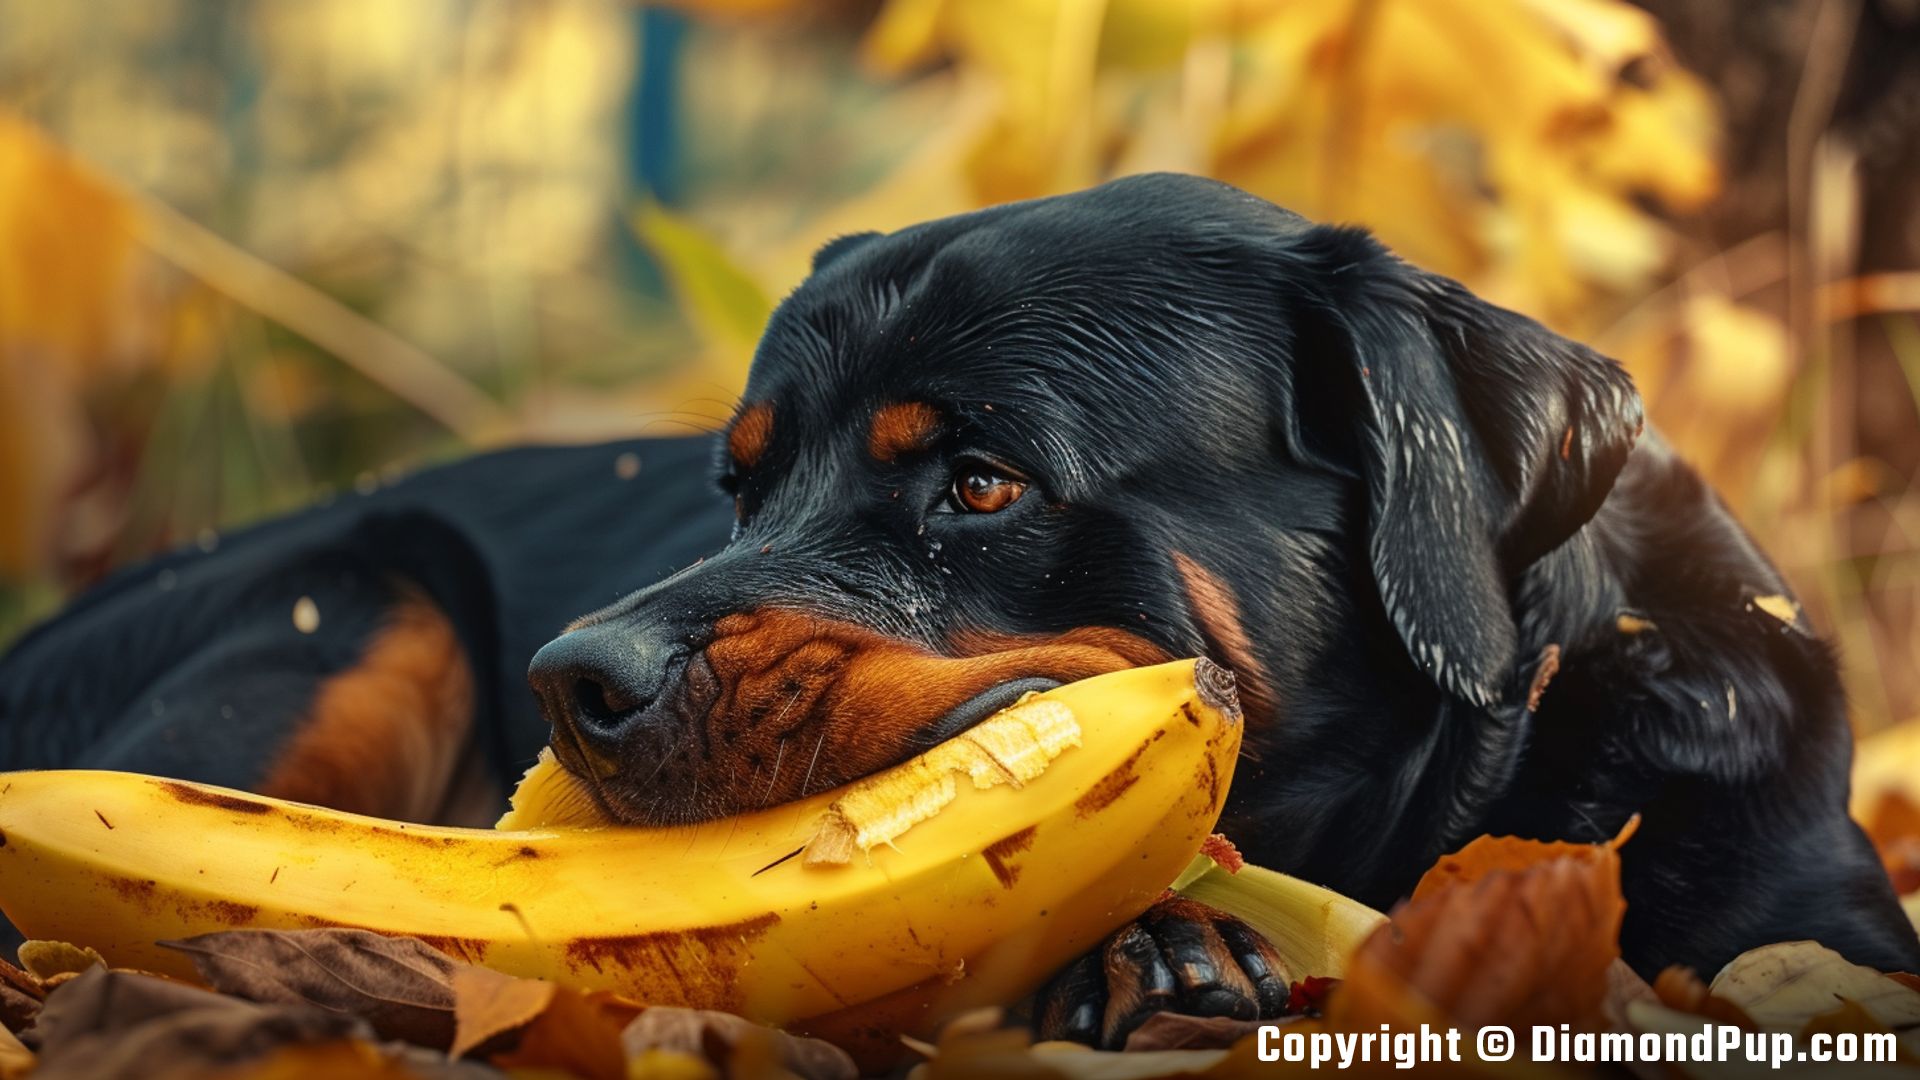 Image of a Happy Rottweiler Snacking on Banana